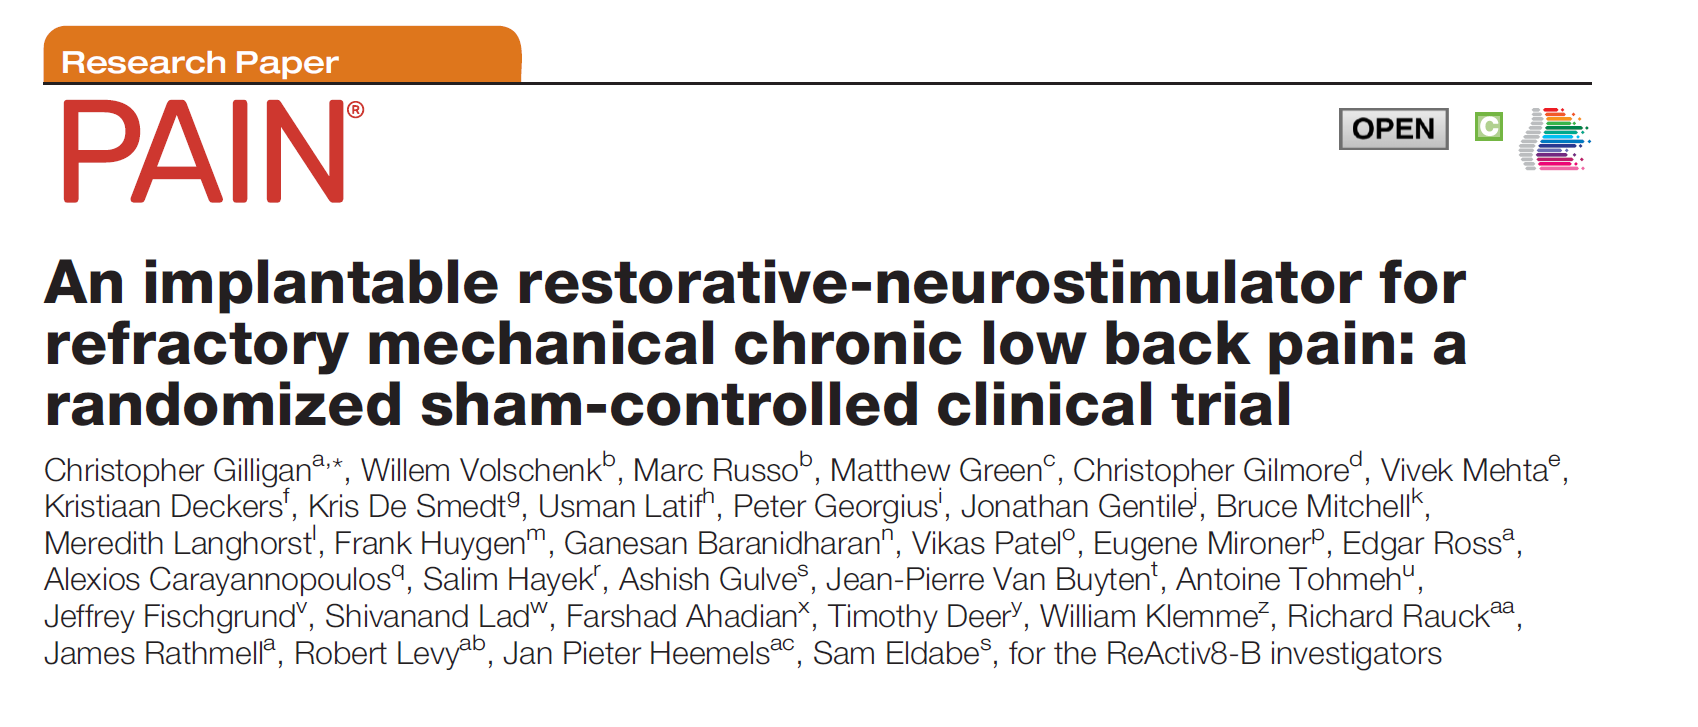 An implantable restorative-neurostimulator for refractory mechanical chronic low back pain: a randomized sham-controlled clinical trial Mainstay Medical Australia